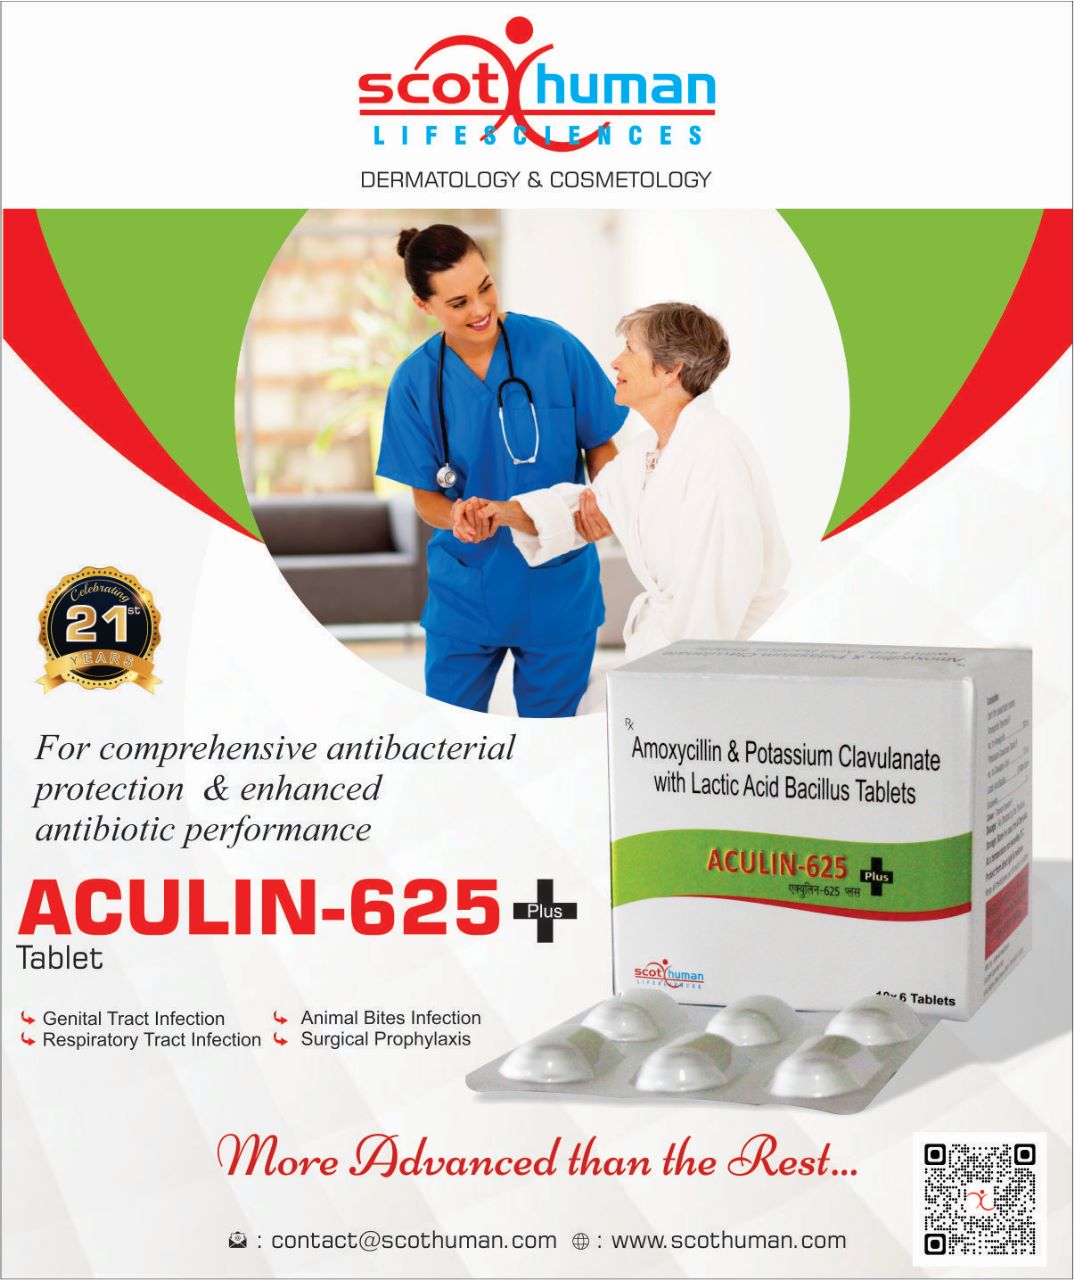 Product Name: Aculin 625+, Compositions of Amoxycillin and Potassium Clavulanate with Lactic Bacillus Tablets are Amoxycillin and Potassium Clavulanate with Lactic Bacillus Tablets - Pharma Drugs and Chemicals